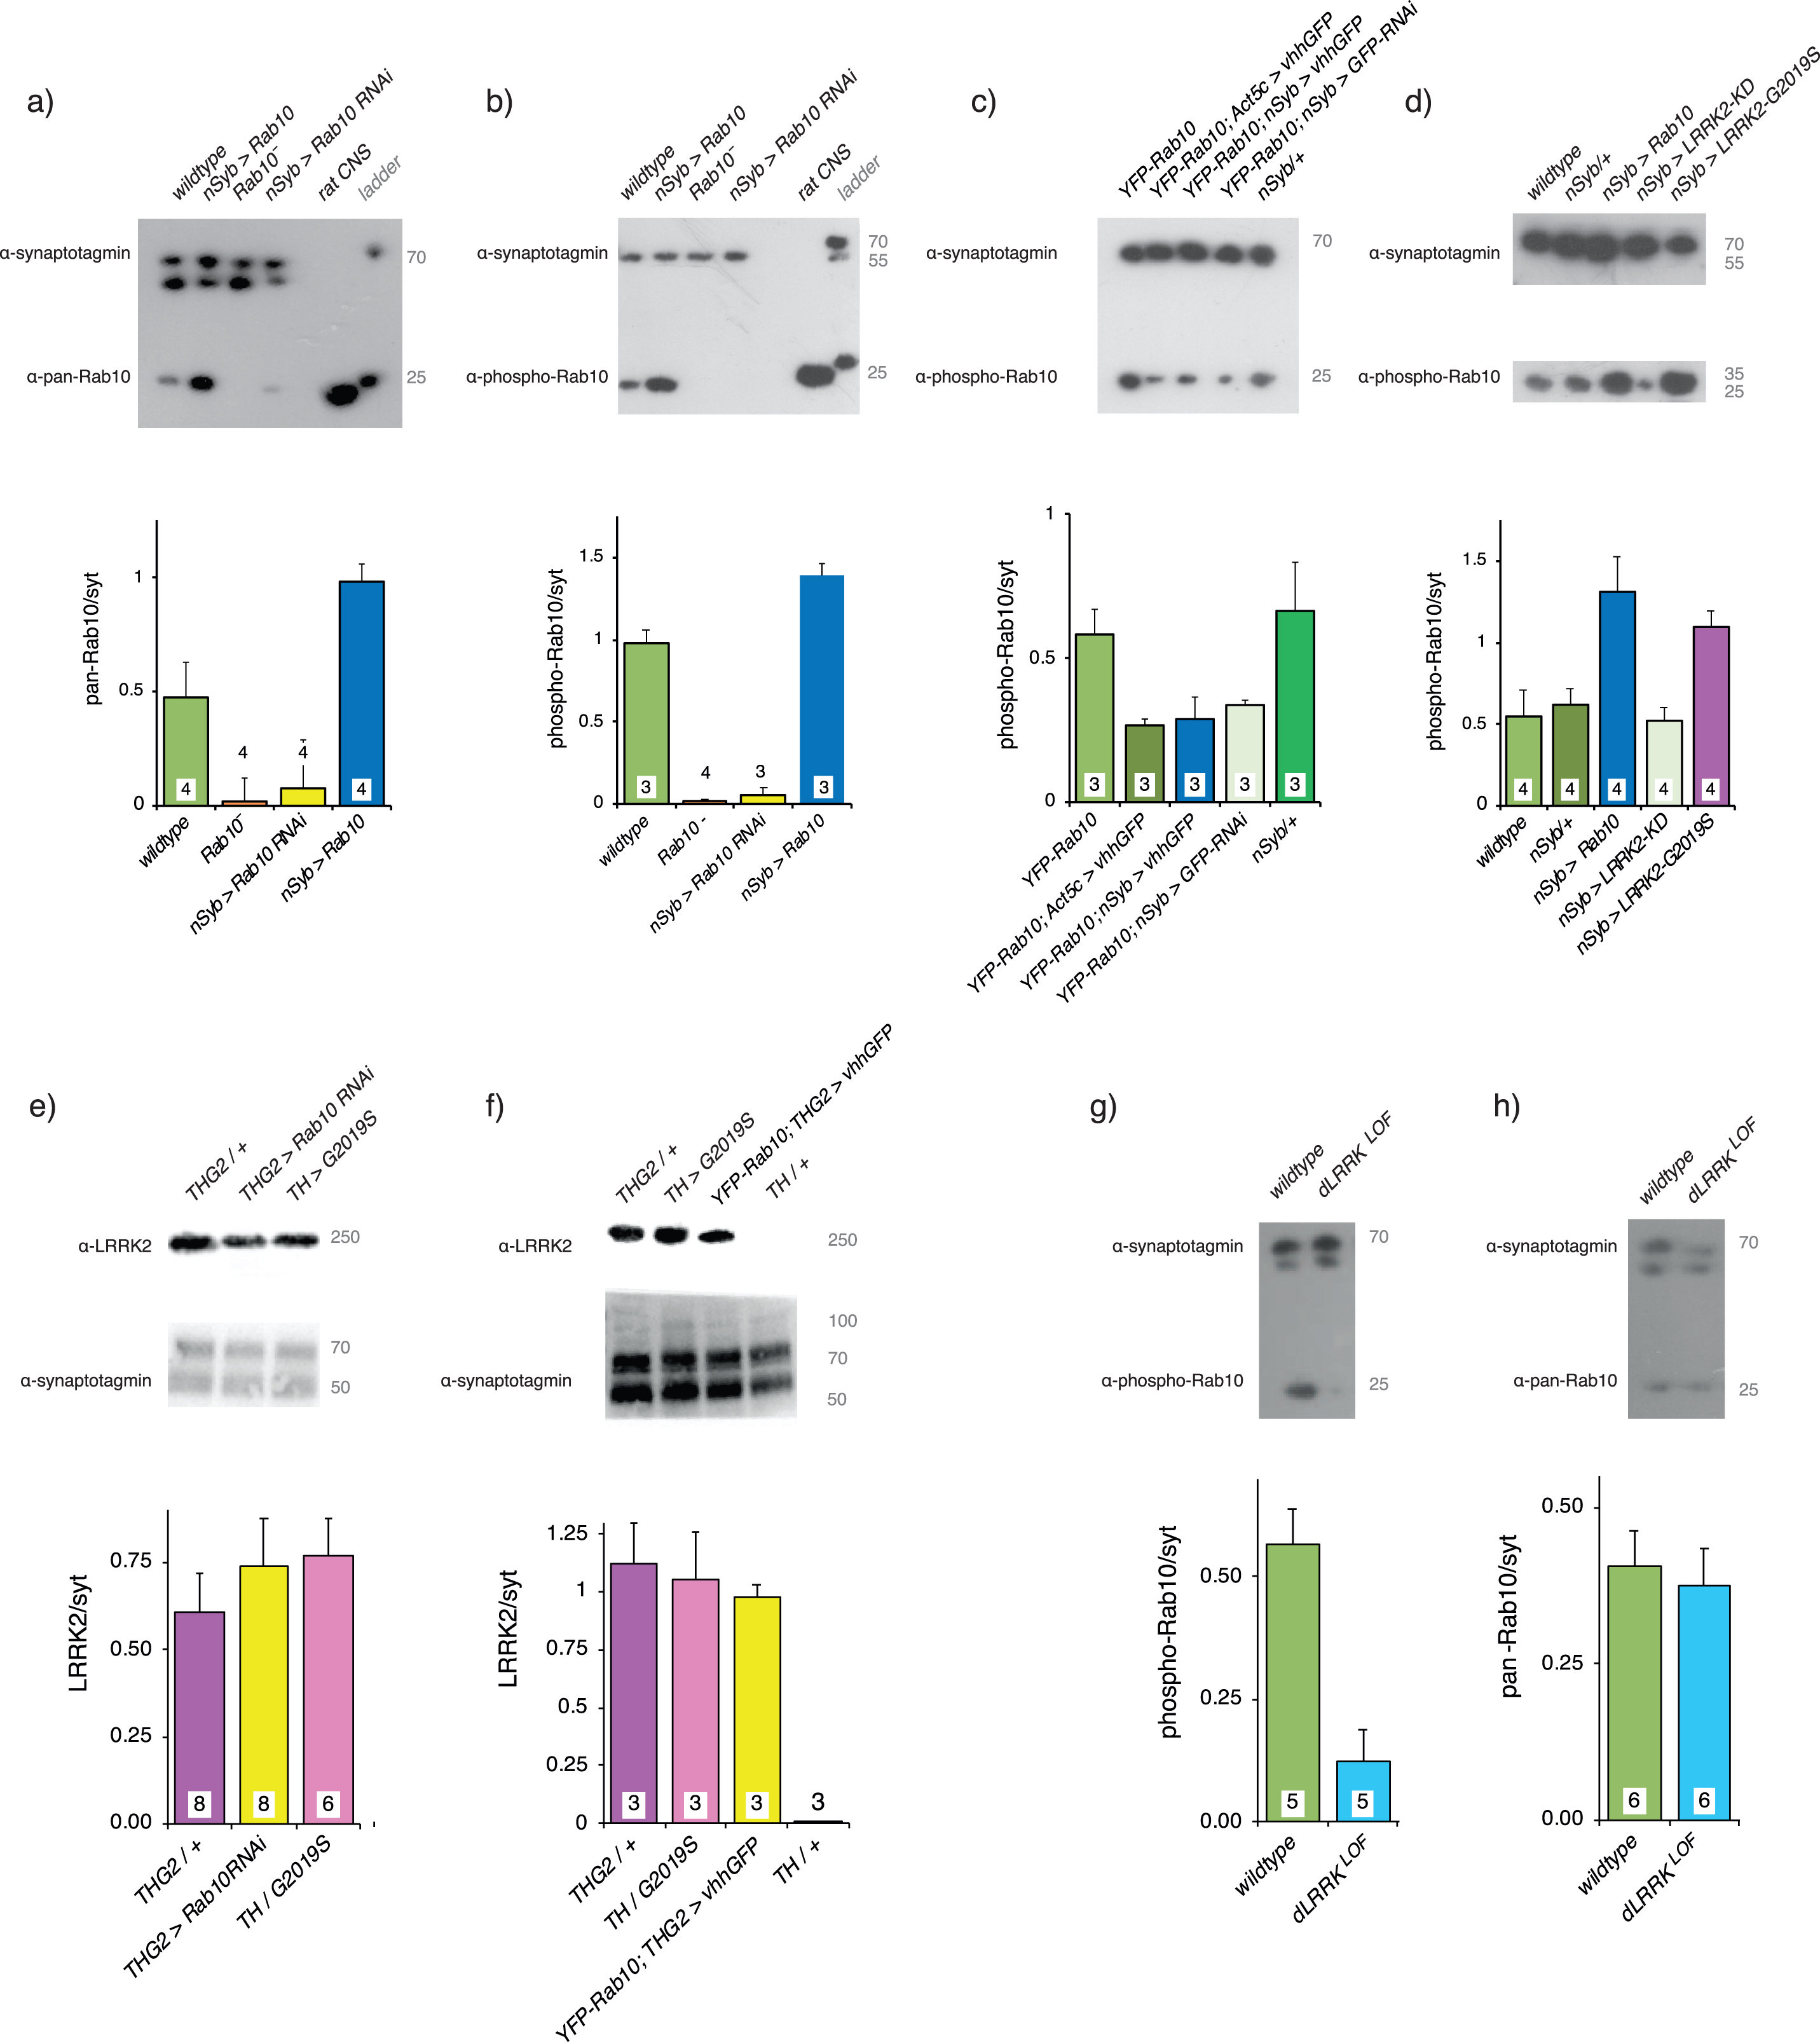 Validation of Rab10 depletion and phosphorylation in vivo. a) A pan-hRab10 antibody detects dRab10 and shows that Rab10 is increased by neuronal (nSyb-GAL4) expression of UAS-Rab10, abolished in the Rab10− null, and substantially reduced by neuronal expression of Rab10RNAi. Antibody-specificity was confirmed by rat CNS binding. b) A phosopho-hRab10 antibody detects phospho-dRab10, which is increased by neuronal expression of UAS-Rab10, but undetectable with the Rab10− null or with neuronal expression of Rab10RNAi. c) Validation of deGradFP technique. In flies where endogenous Rab10 has been replaced by YFP-Rab10, global (Act5c-GAL4) or neuronal expression of the vhhGFP nanobody reduces the level of YFP-Rab10 by ∼50%. A slightly smaller reduction is achieved by neuronal expression of GFPRNAi. d) Neuronal expression of Rab10 increases pRab10, as does neuronal expression of LRRK2-G2019S. Neuronal expression of a kinase-dead LRRK2 (KD, LRRK2-G2019S-K1906M) has no effect on the phosphorylation of Rab10. e) Adding Rab10 RNAi expression does not reduce the level of LRRK2-G2019S. f) Adding expression of the GFP nanobody does not reduce the level of LRRK2-G2019S. Note that the THG2 and TH > G2019S samples in f are different to those in e. g) The dLRRKLOF mutations in the fly LRRK2 ortholog, dLRRK is a severe loss of function P-element insertion. This mutant reduces the phosphorylation of Rab10. h) dLRRKLOF, however, does not affect the pan-Rab10 level. Loading control: α-drosophila-synaptotagmin (α-syt), which recognizes at least 3 isoforms, depending on the blot time. Each panel contains a sample blot and quantification (using the upper α-syt band for each blot) below. Exact genotypes in Supplementary Table 2.